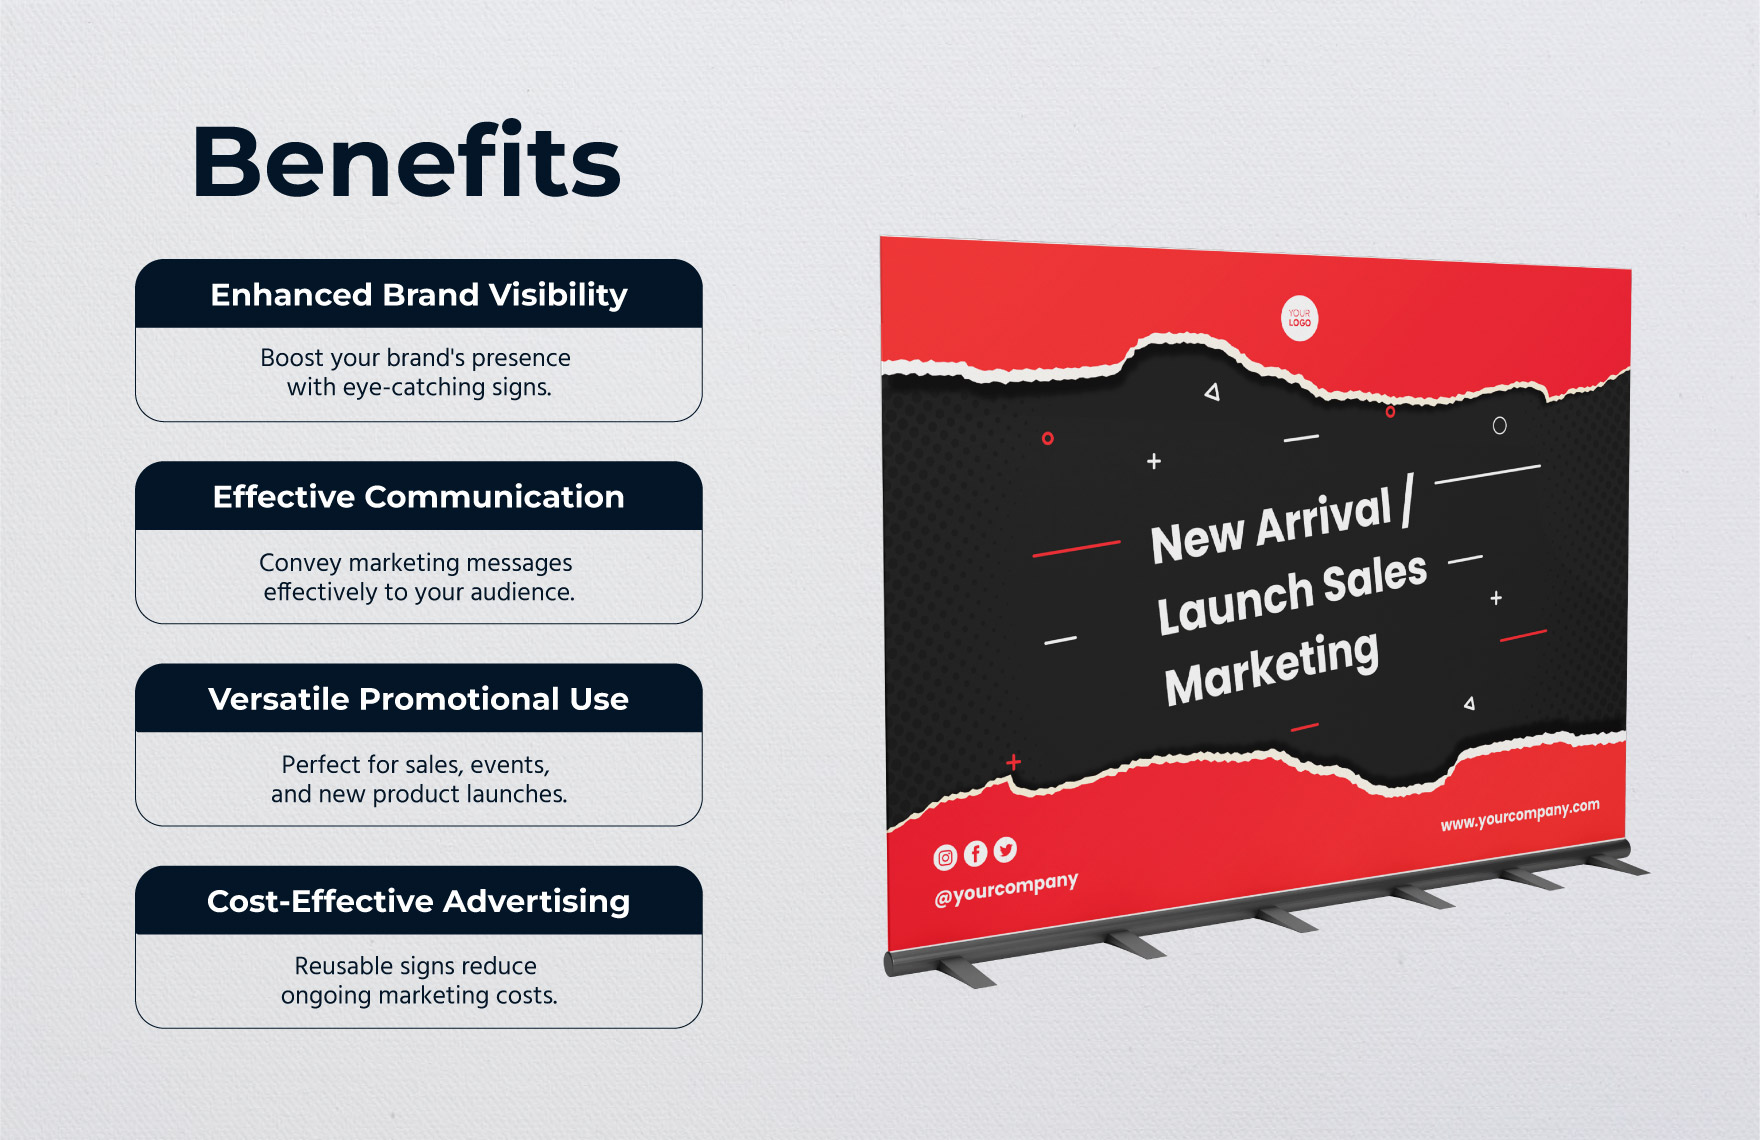 New Arrival or Launch Sales Marketing Sign Template